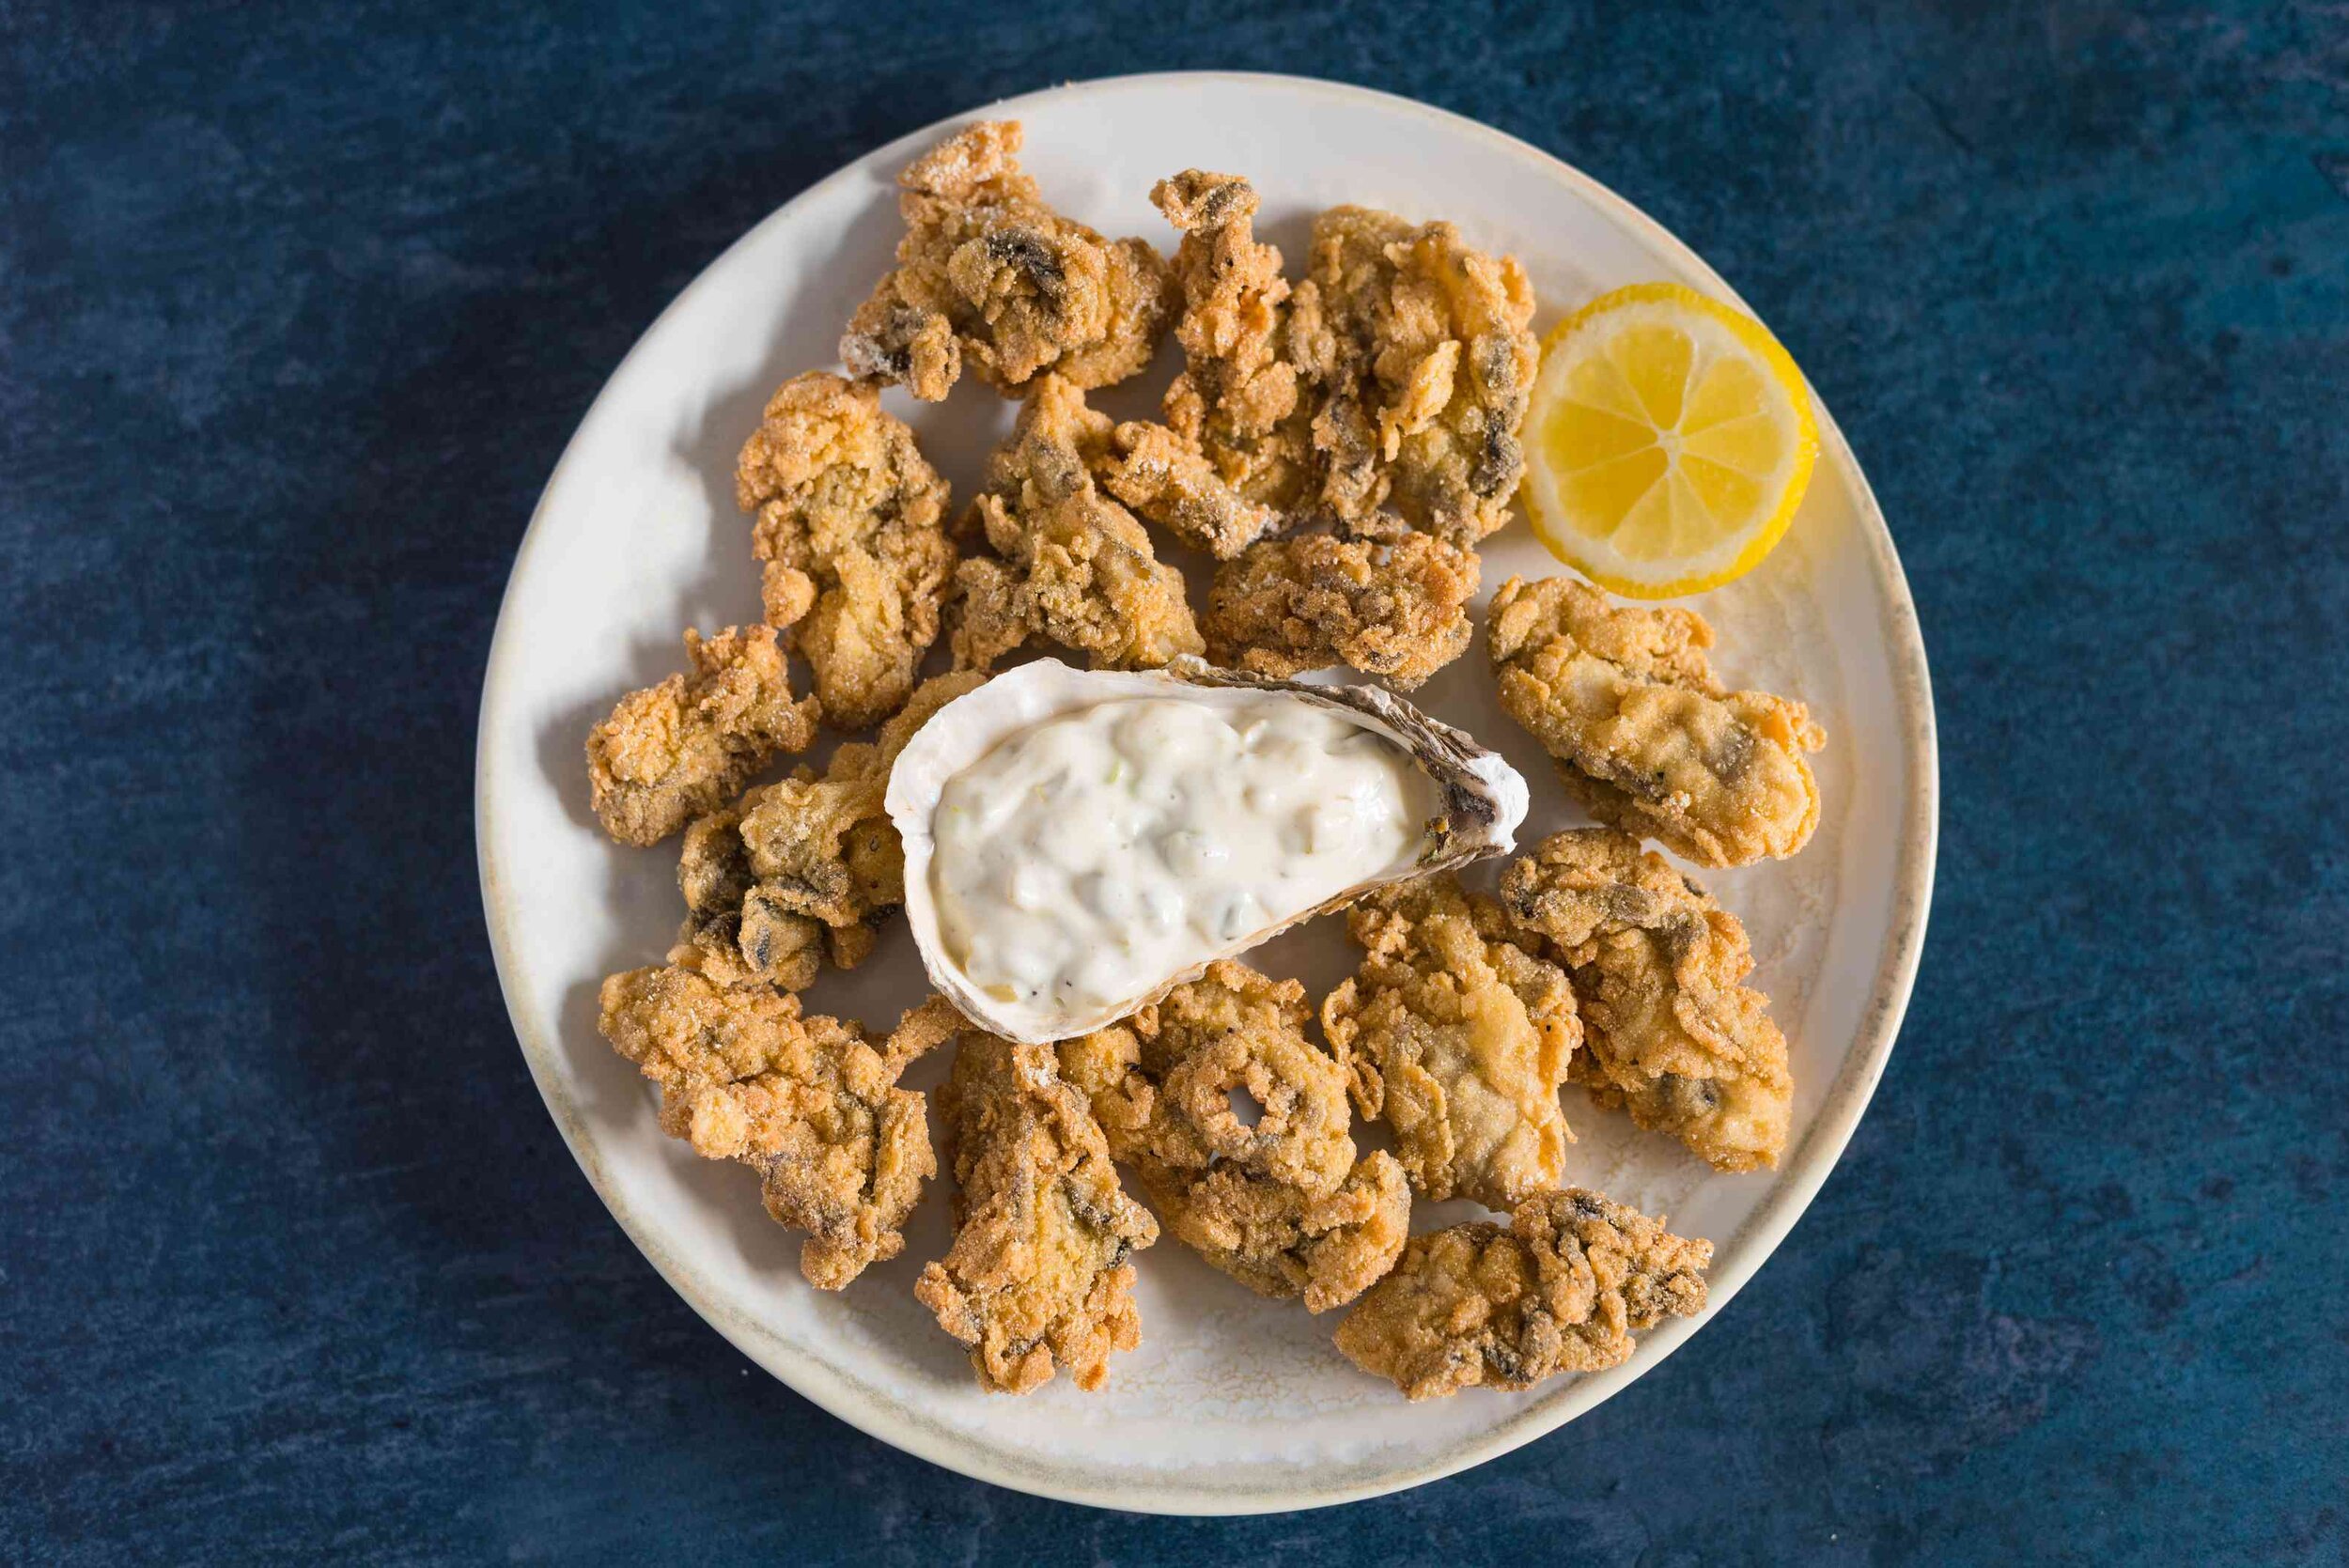 Fried Oysters - The Spruce Eats